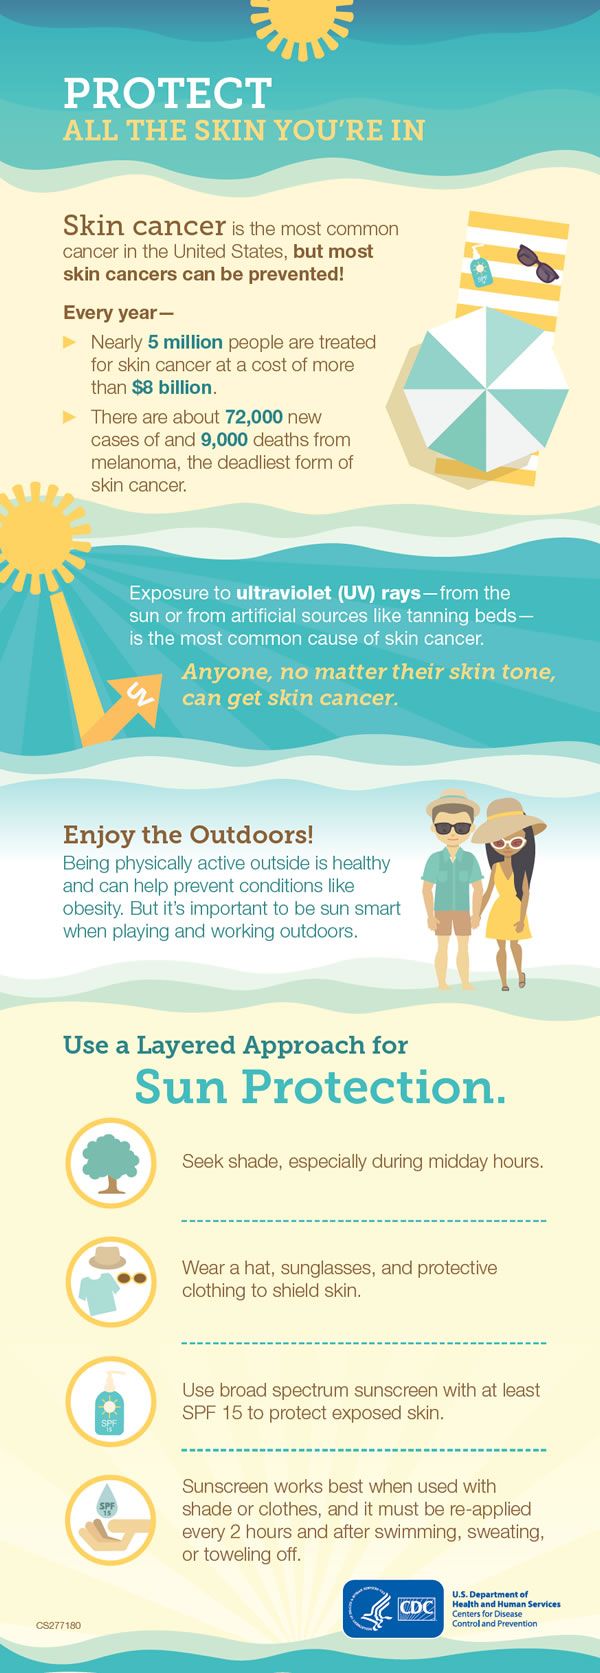 Skin cancer is the most common cancer in the United States, but most skin cancers can be prevented. Use a layered approach for sun protection. Blog Infographic, High Blood Pressure Recipes, Blood Pressure Range, Low Sodium Recipes Blood Pressure, Blood Pressure Numbers, Medical Photography, Blood Pressure Symptoms, Blood Pressure Food, Blood Pressure Chart